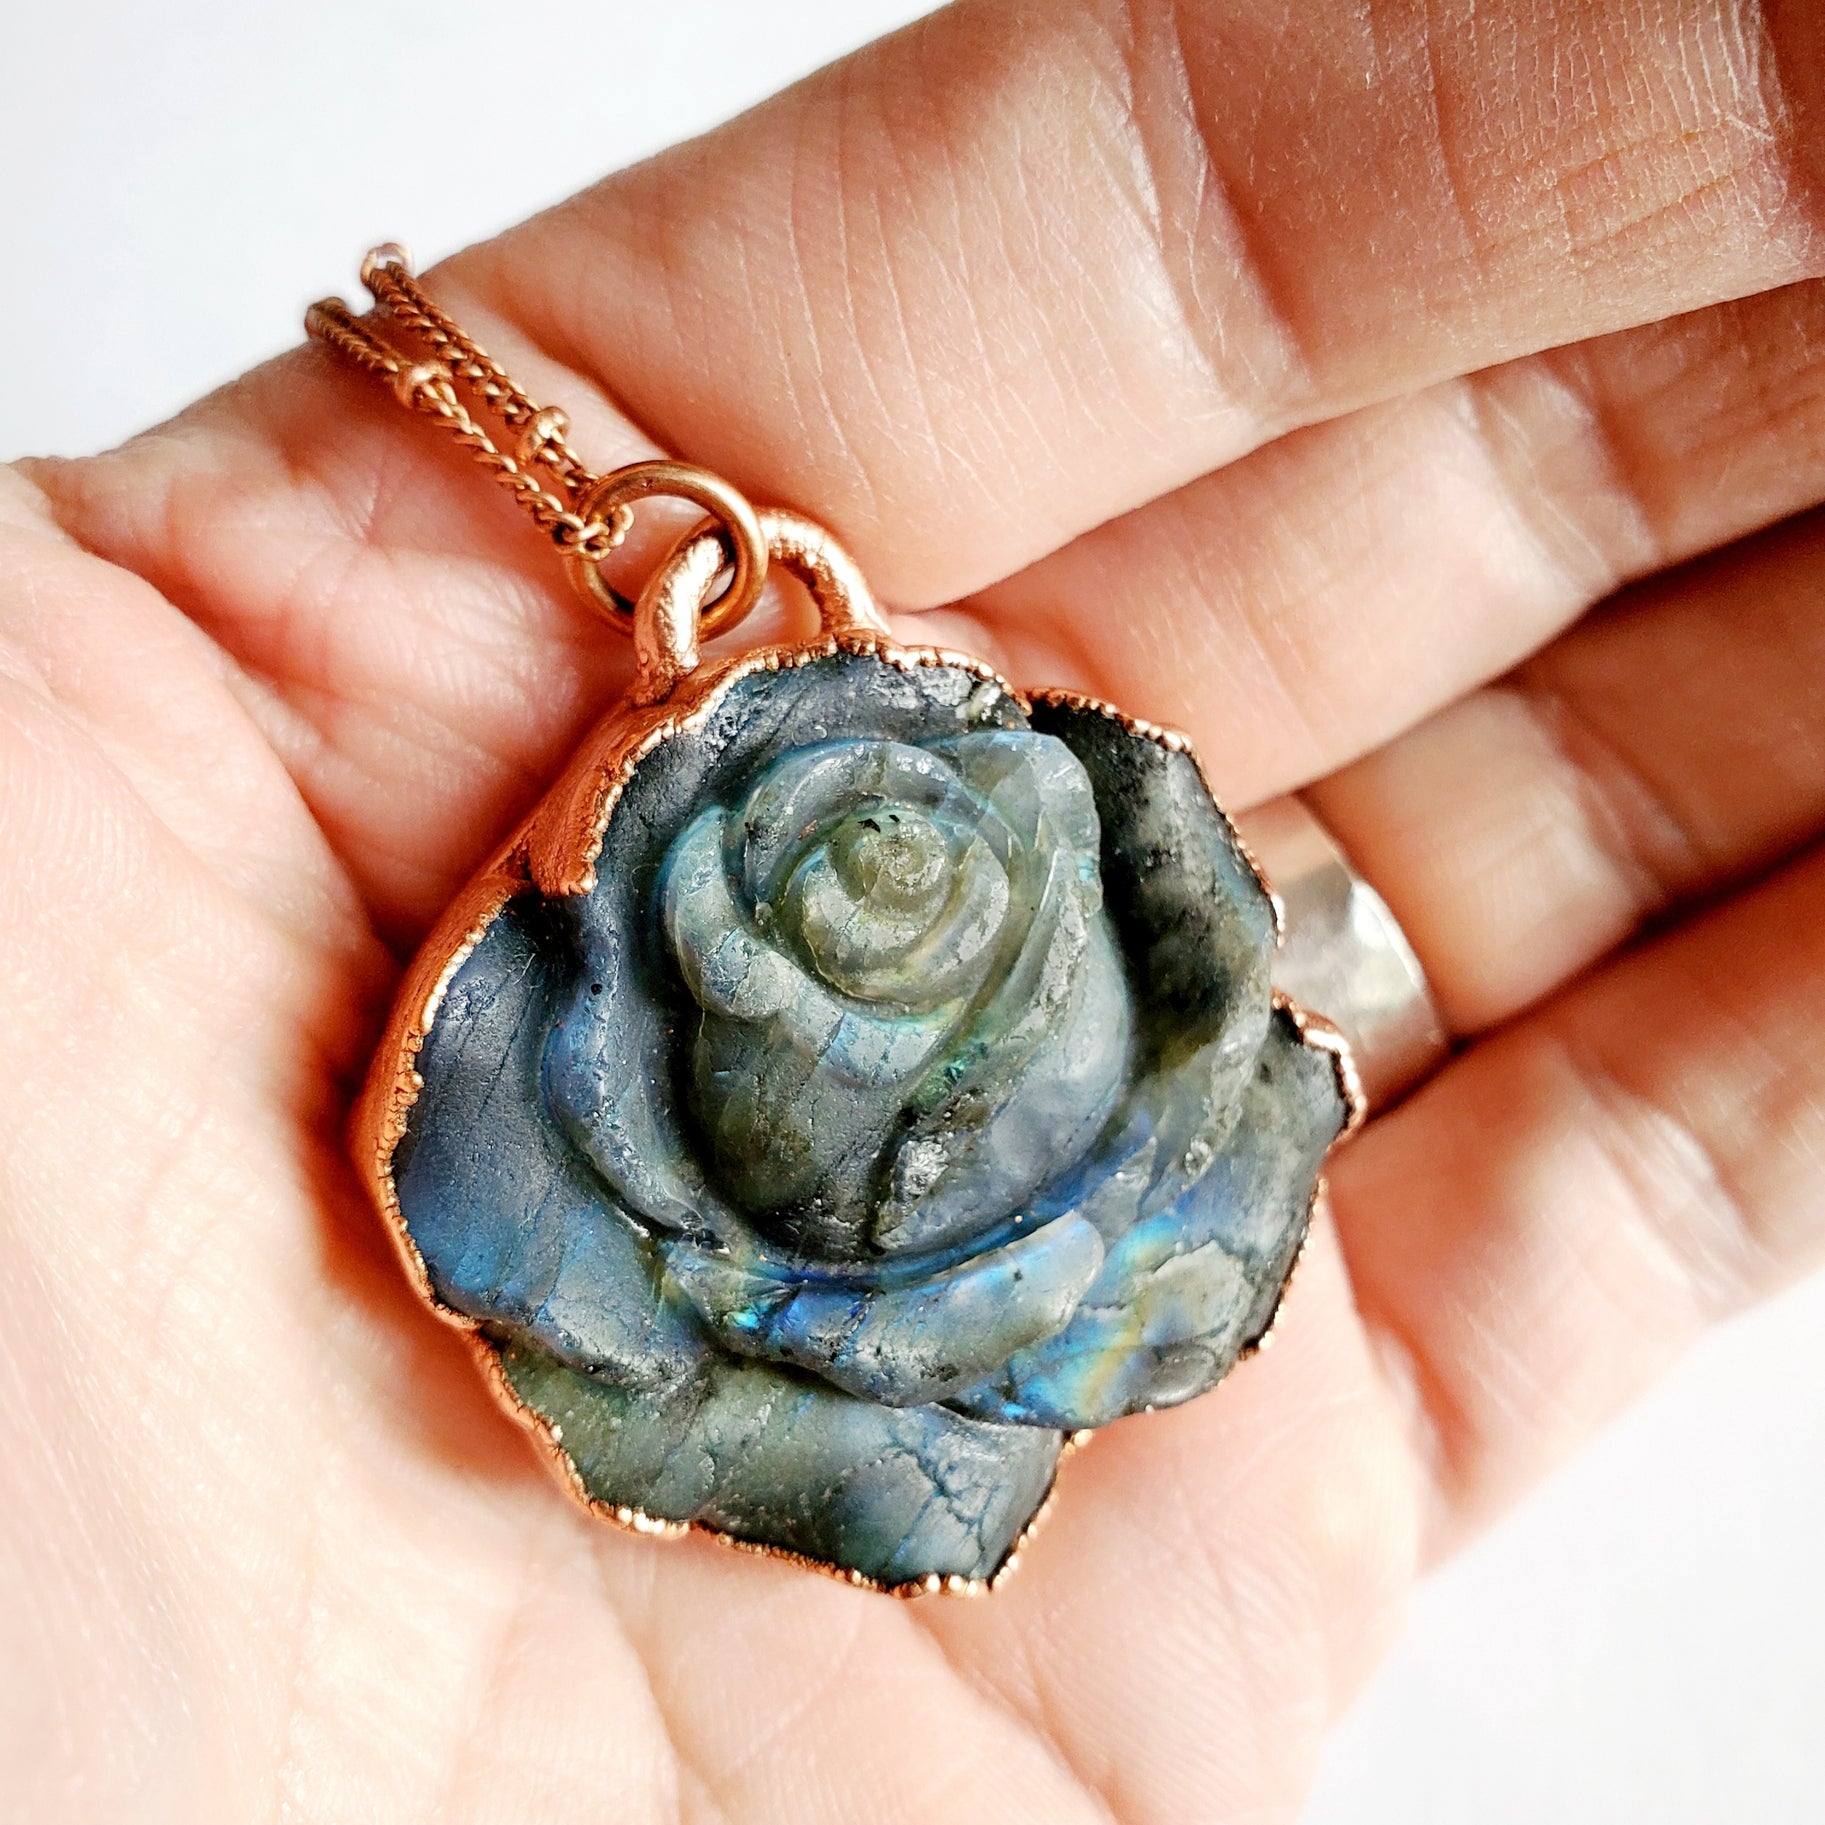 Carved Labradorite Rose Necklace - Wild Luxe Boutique